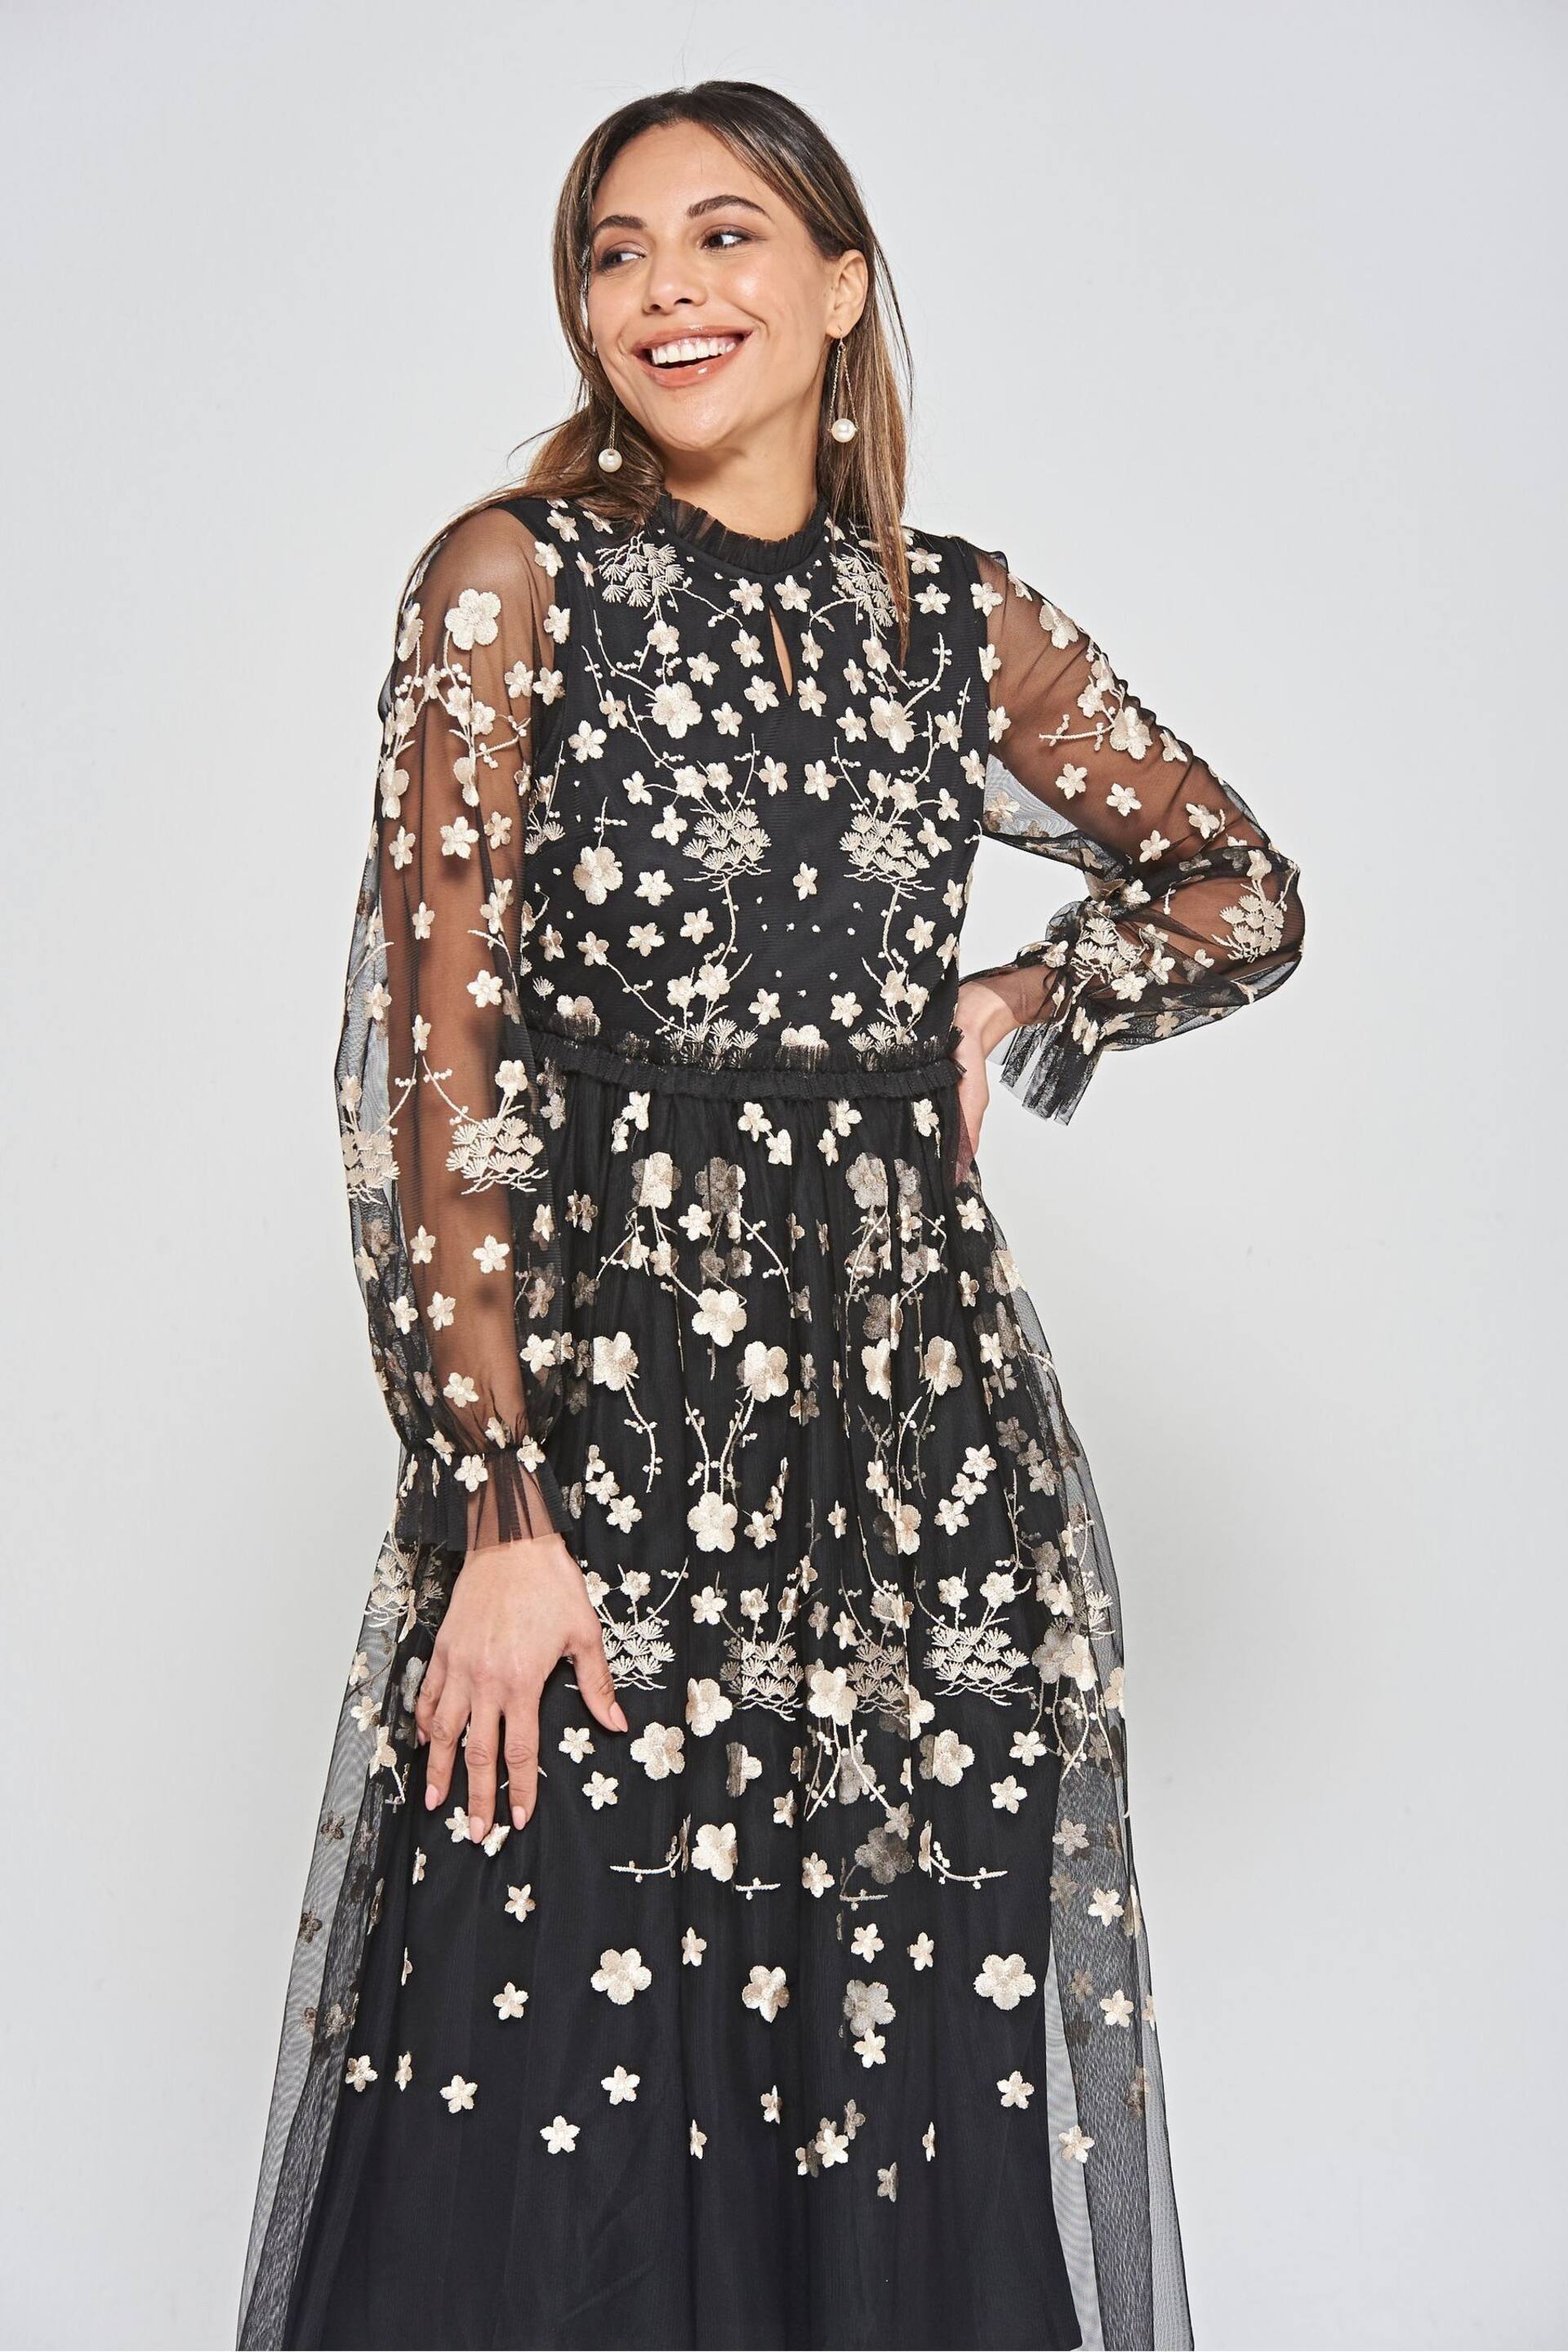 Frock and Frill Embroidered Midi Black Dress - Image 4 of 4